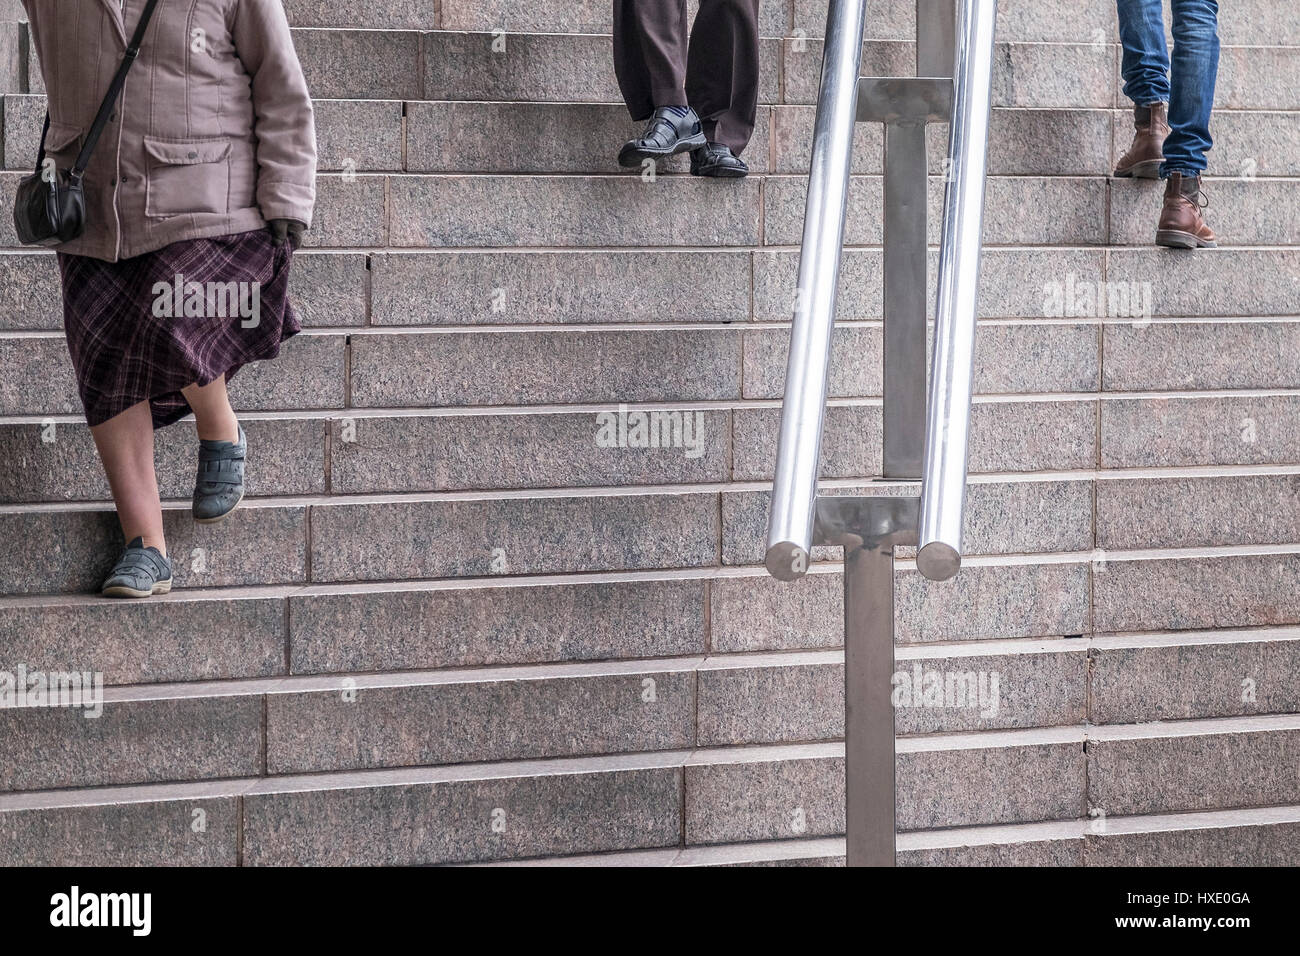 People Walking Ascending Descending Stairs Steps Handrail Going Up Down Stock Photo